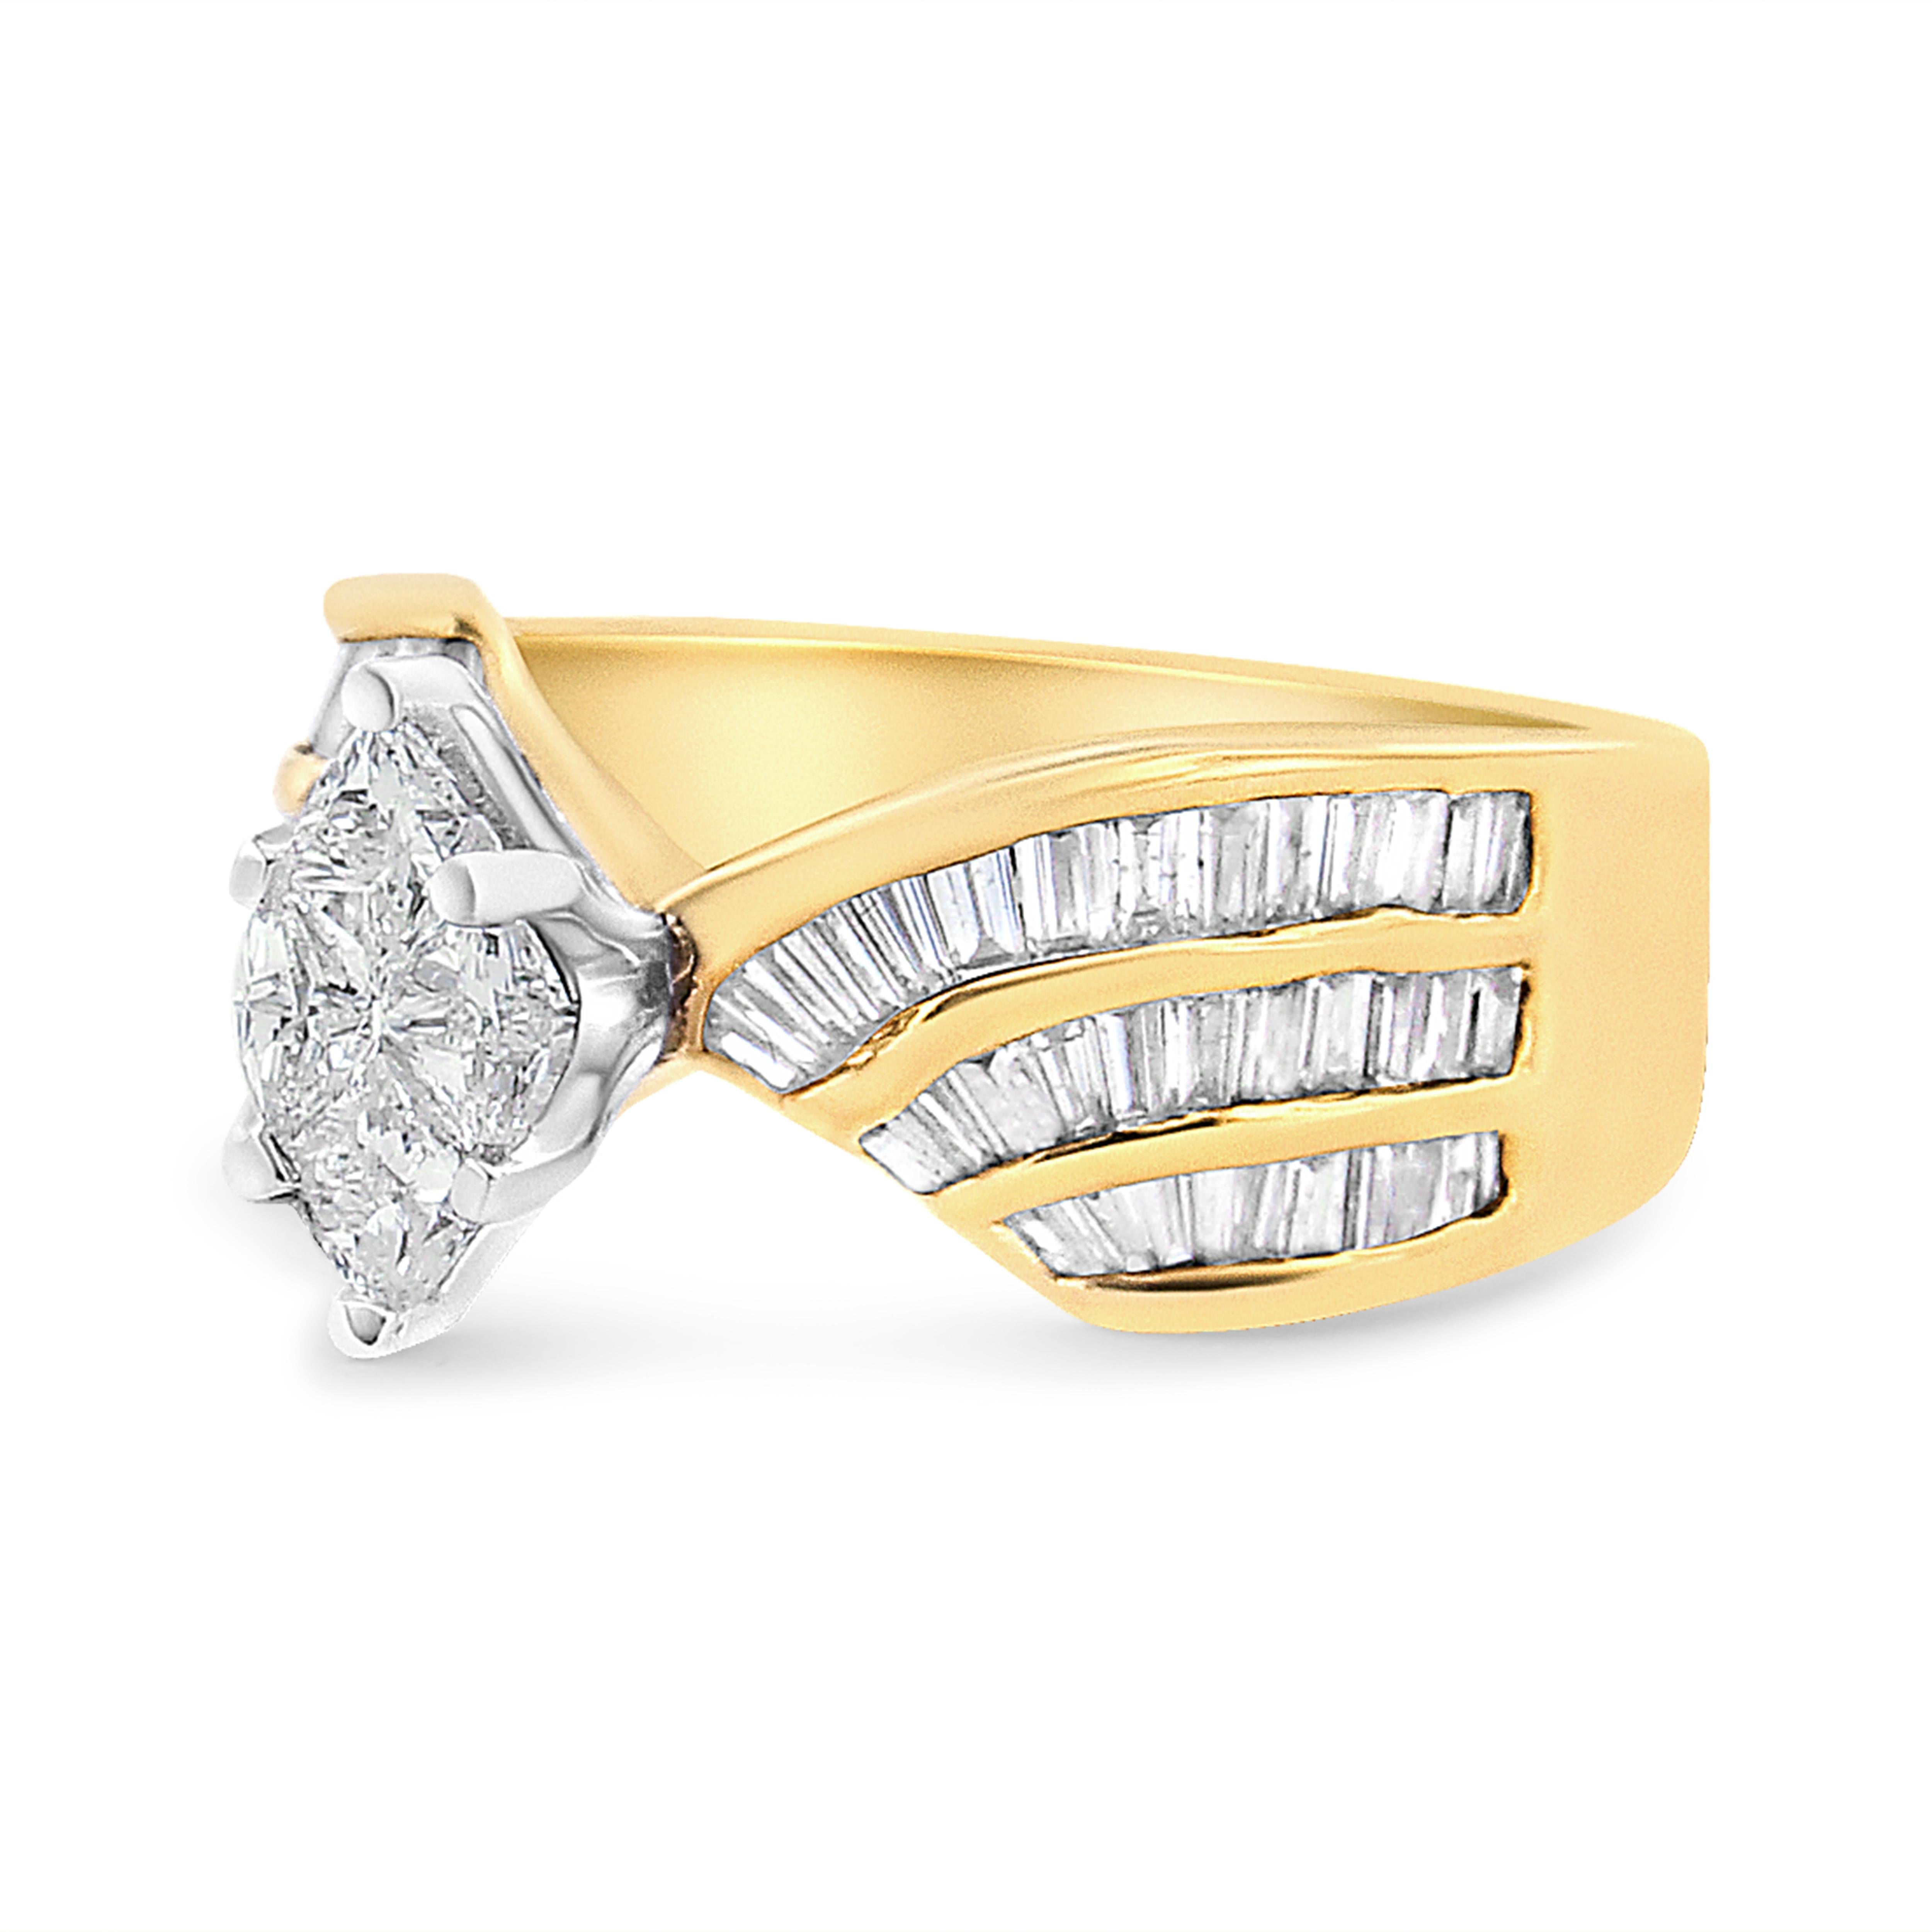 Intricately designed, this 14k two tone gold ring is expertly set with 1 1/4 cttw of natural diamonds. 4 pie-cut diamonds sit as the center motif of this piece, and baguette-cut diamonds are embellished onto the yellow gold band. The baguette-cut